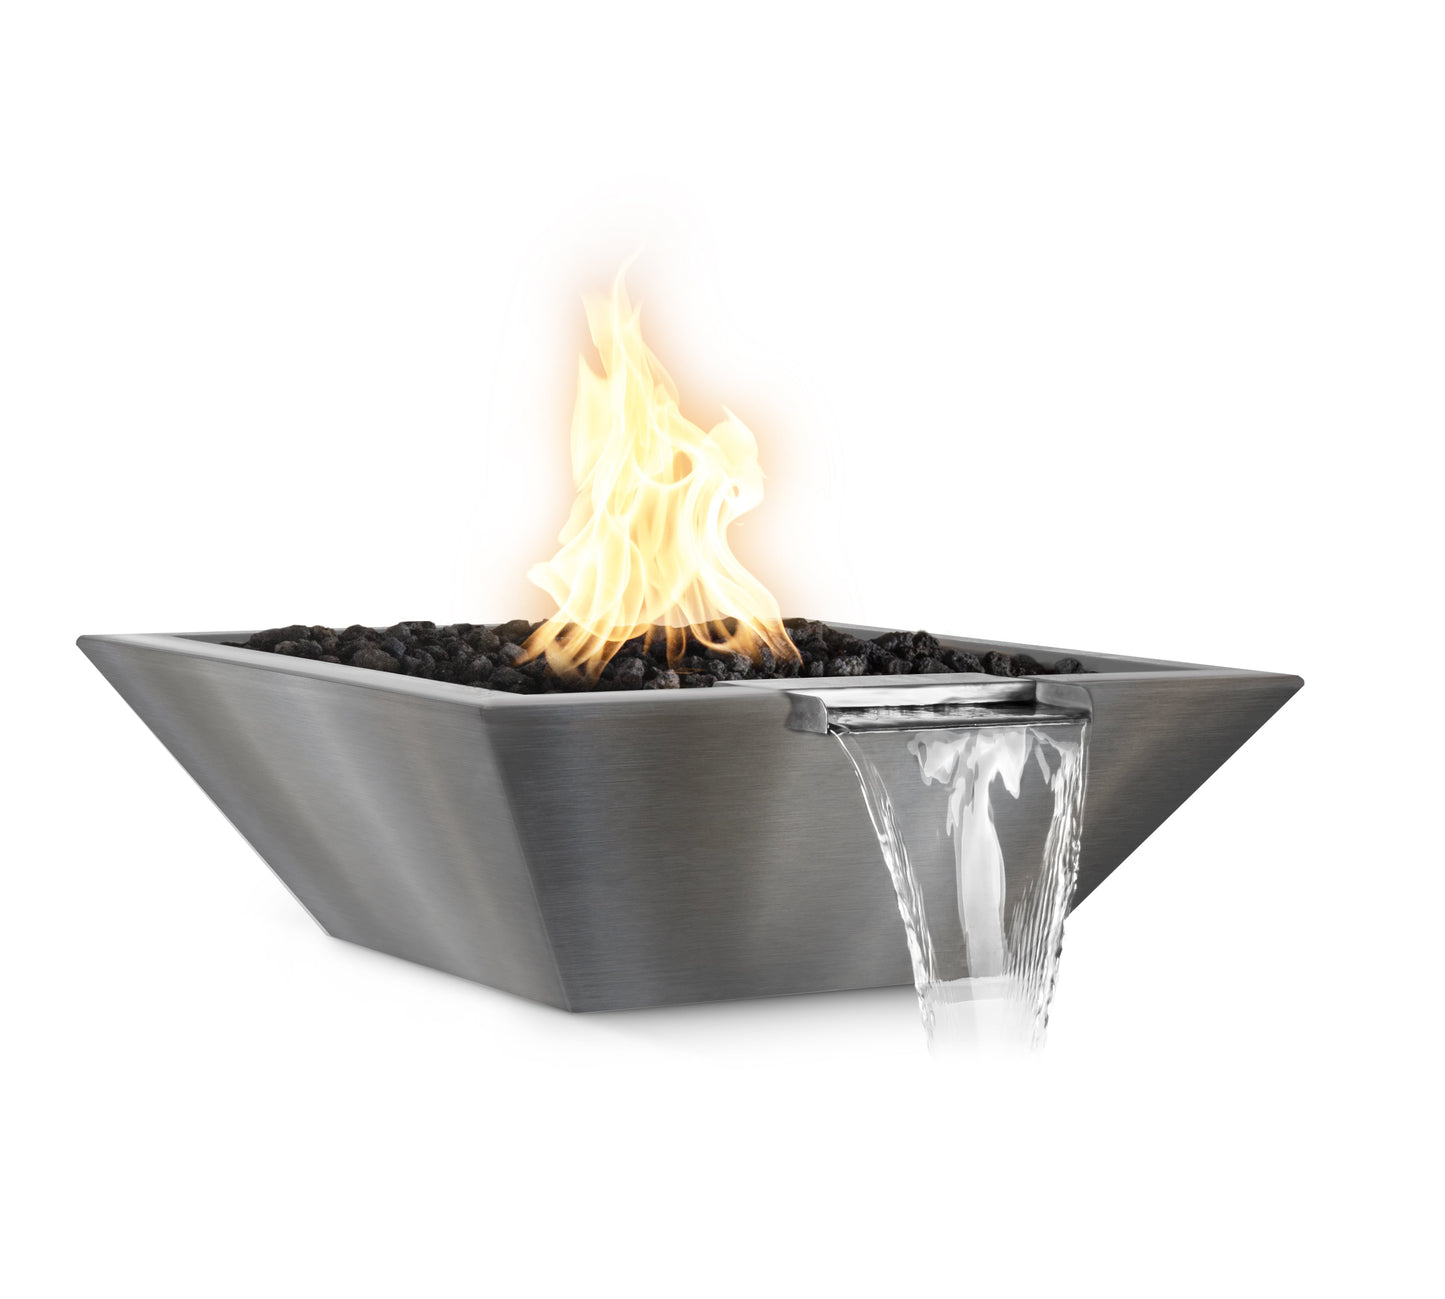 The Outdoor Plus Square Maya 30" Stainless Steel Natural Gas Fire & Water Bowl with Match Lit with Flame Sense Ignition